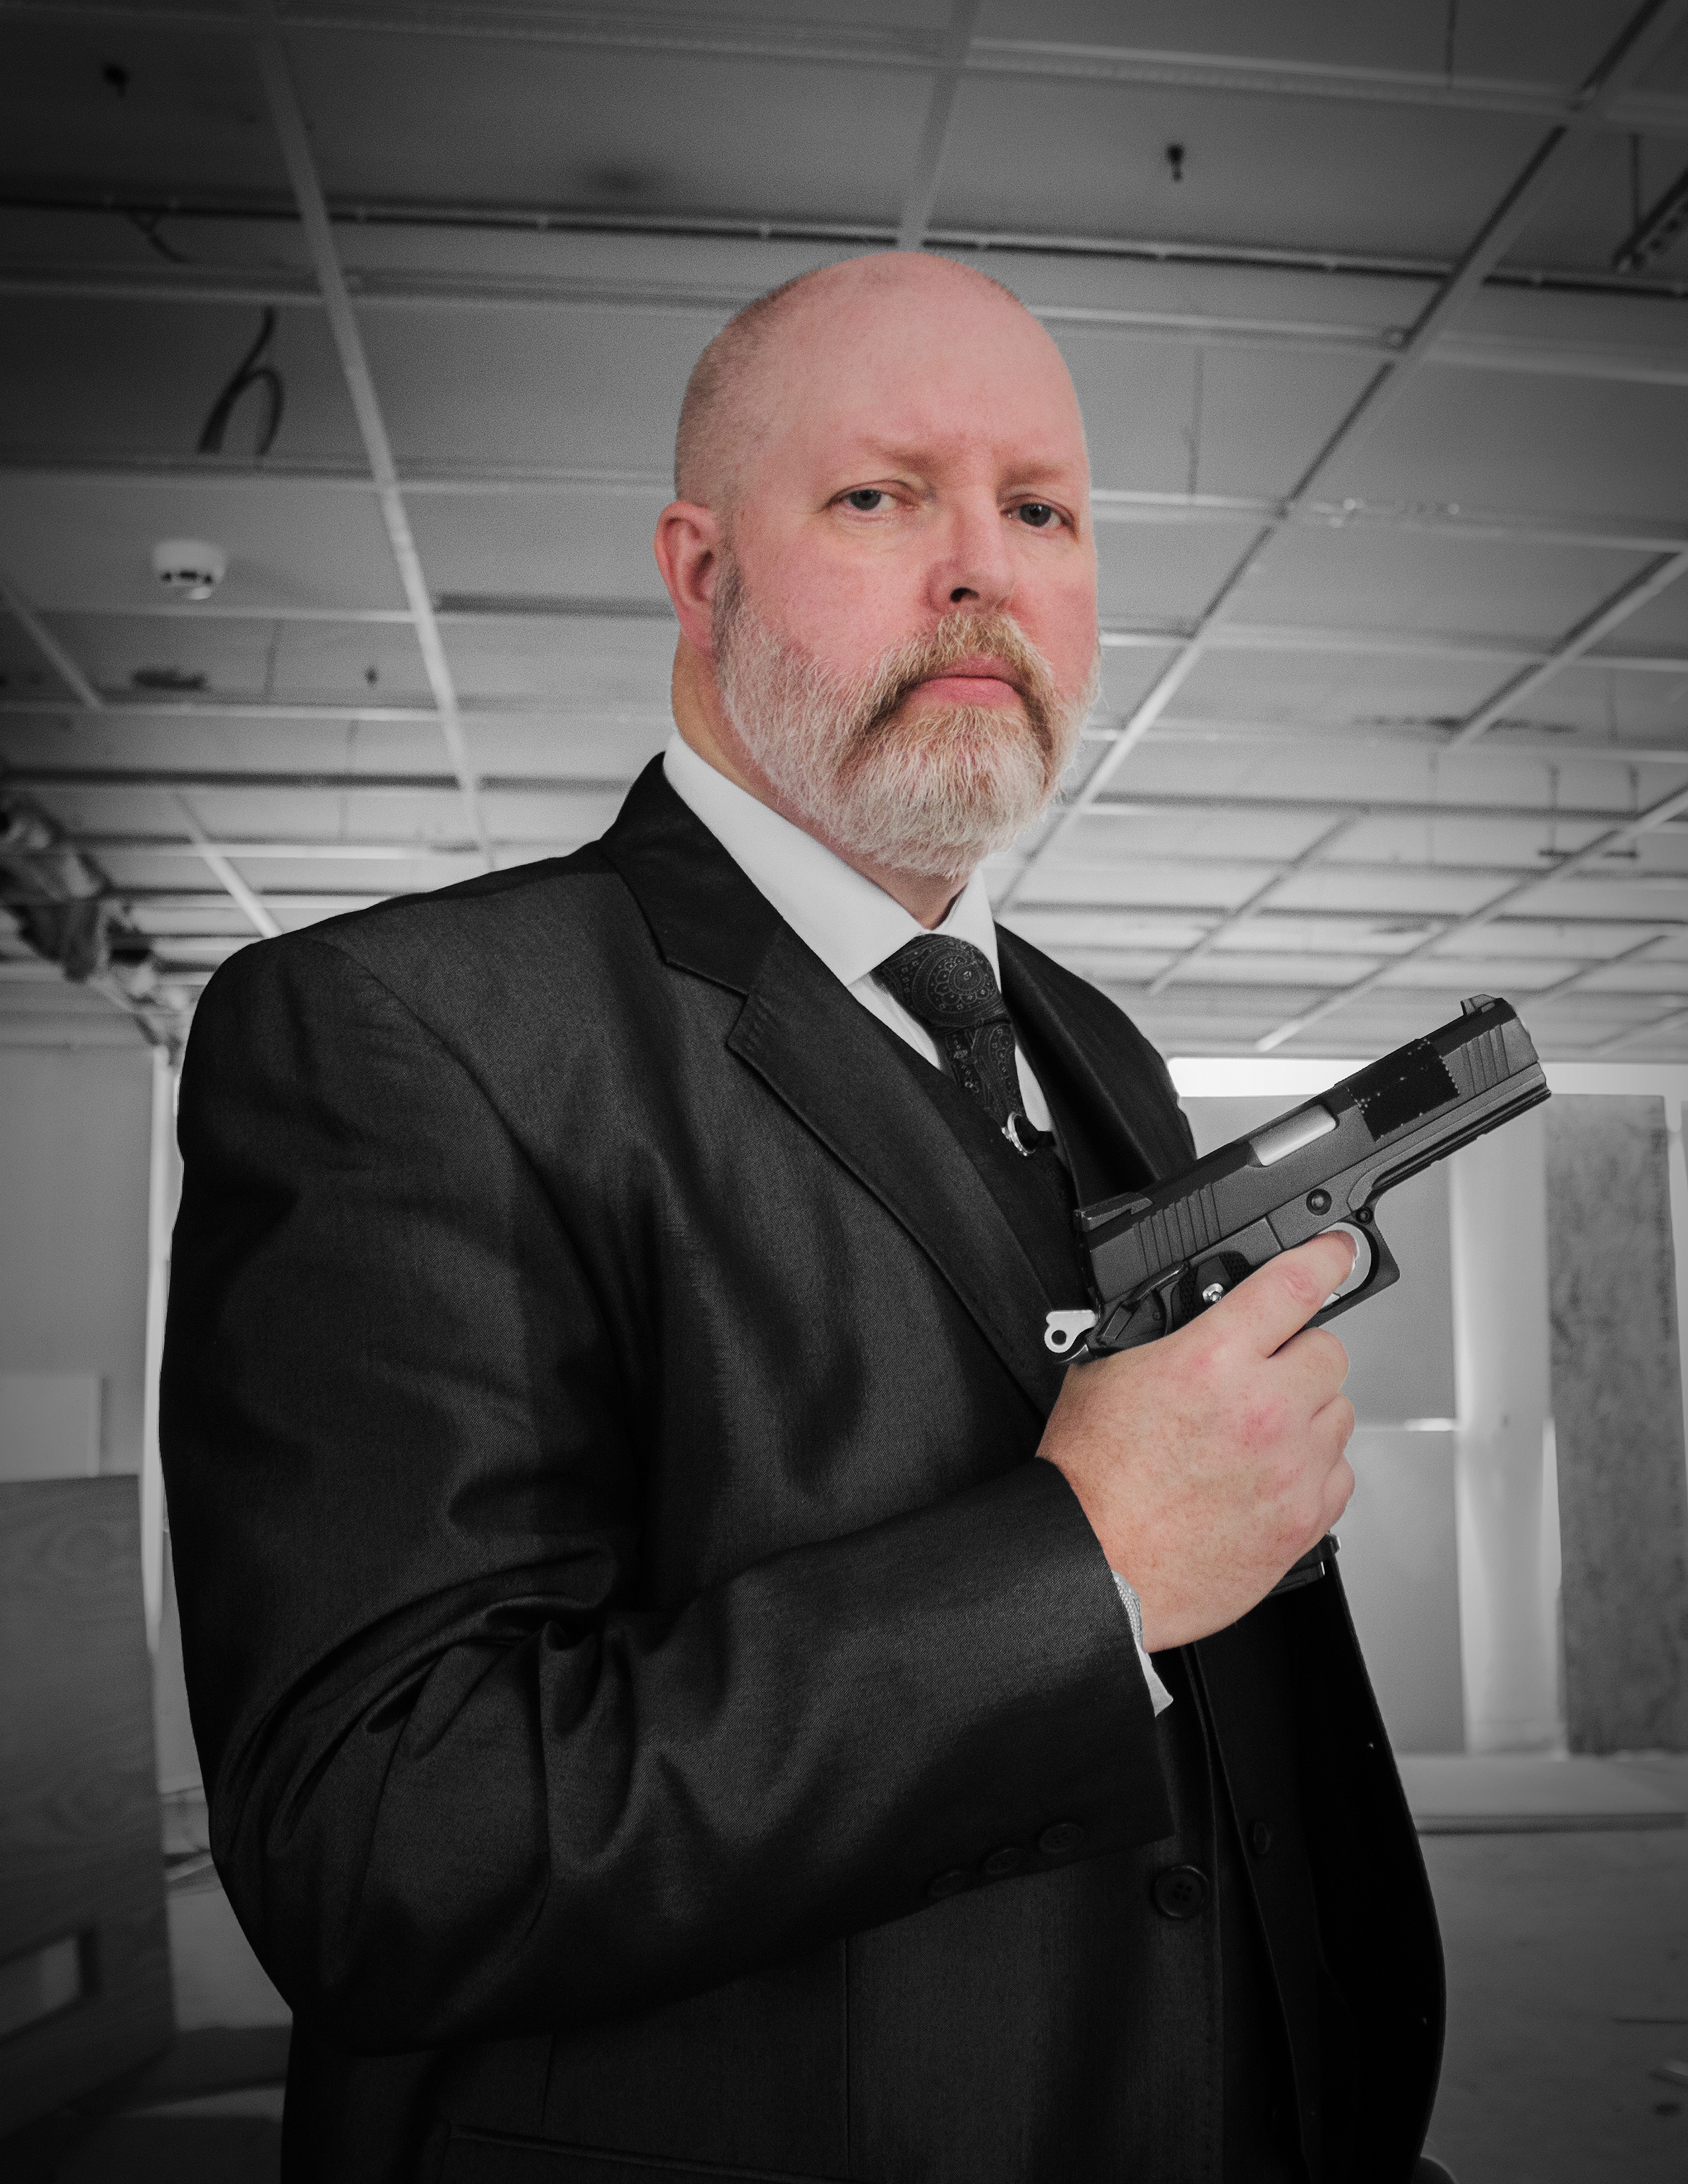 Steve McTigue playing 'Viktor' in the Feature Film 'Retribution' to be released February 2014